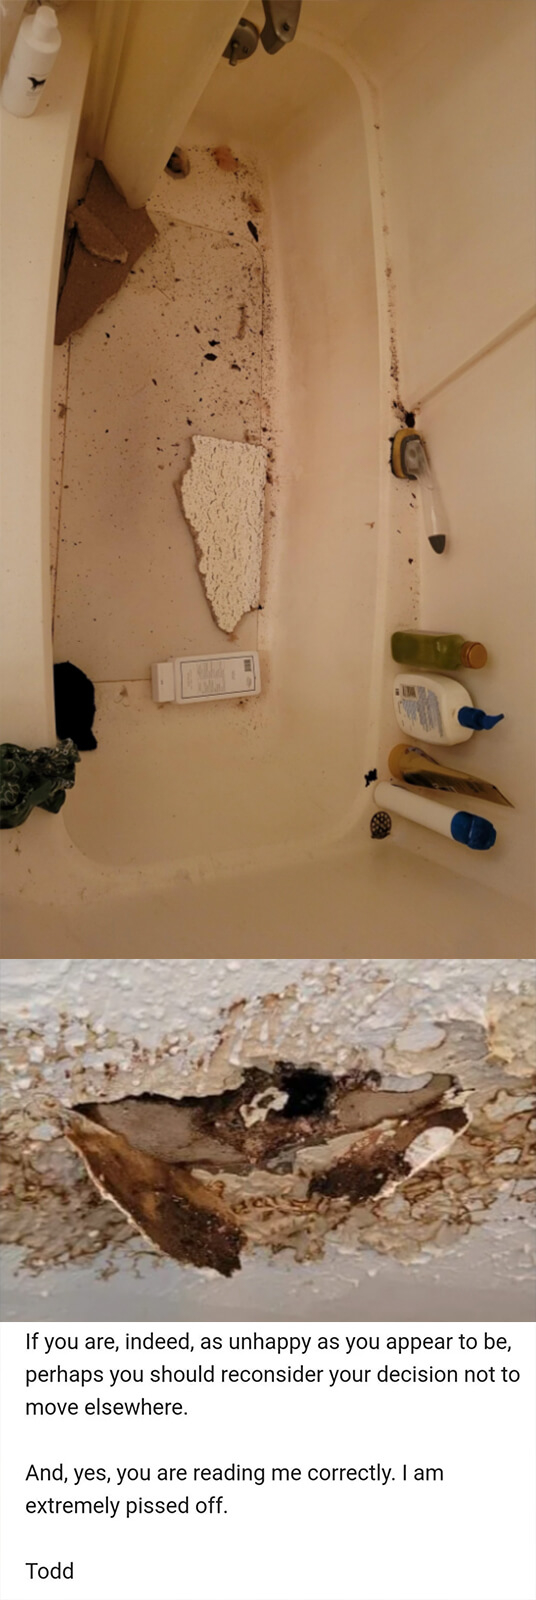 in response to photos of the mold and ceiling falling off the landlord says, perhaps you should reconsider your decision not to move elsewhere